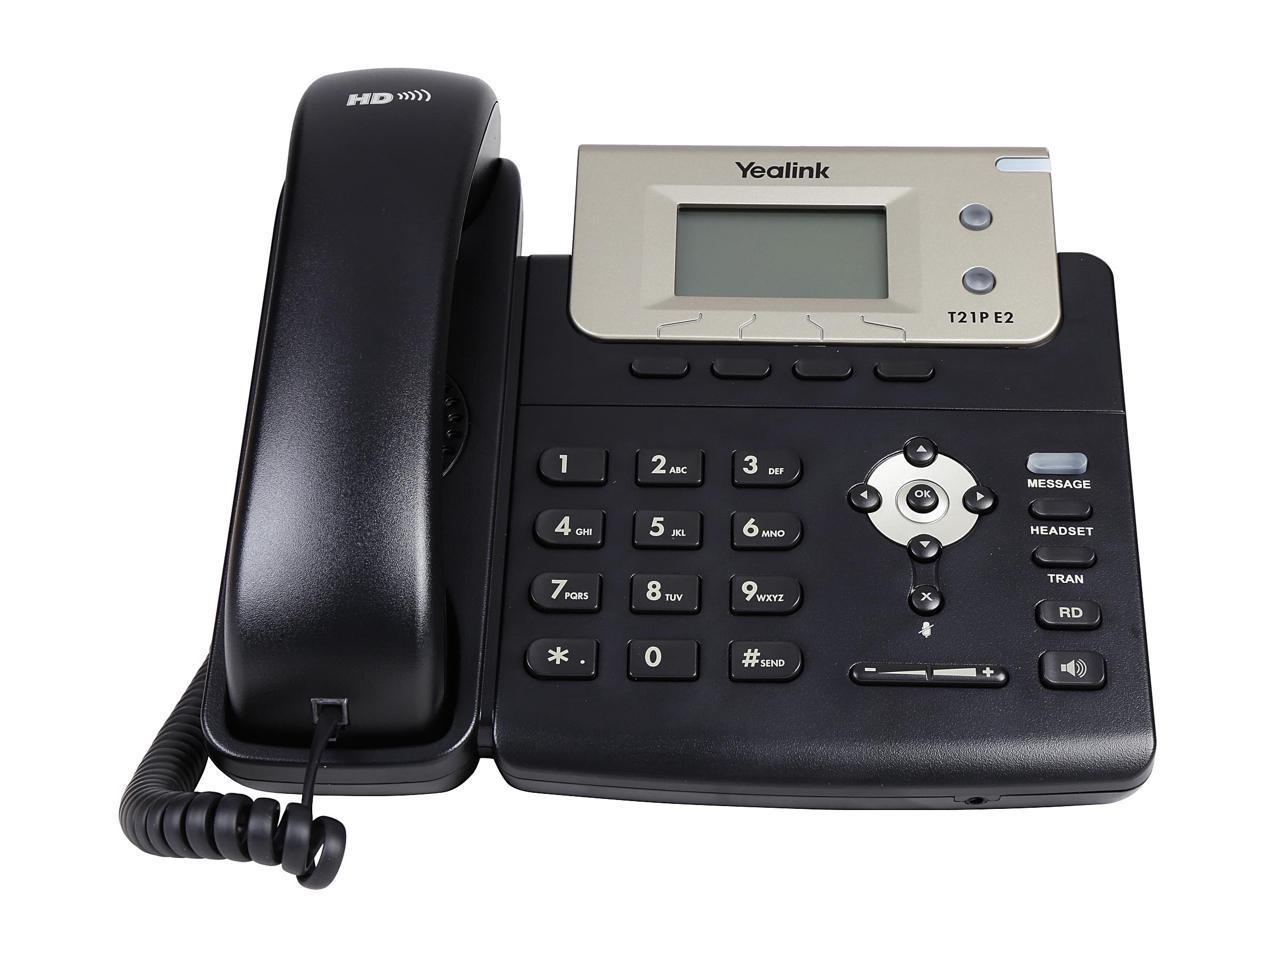 Yealink YEA-SIP-T21P-E2 Entry-level IP phone with 2 Lines & HD voice